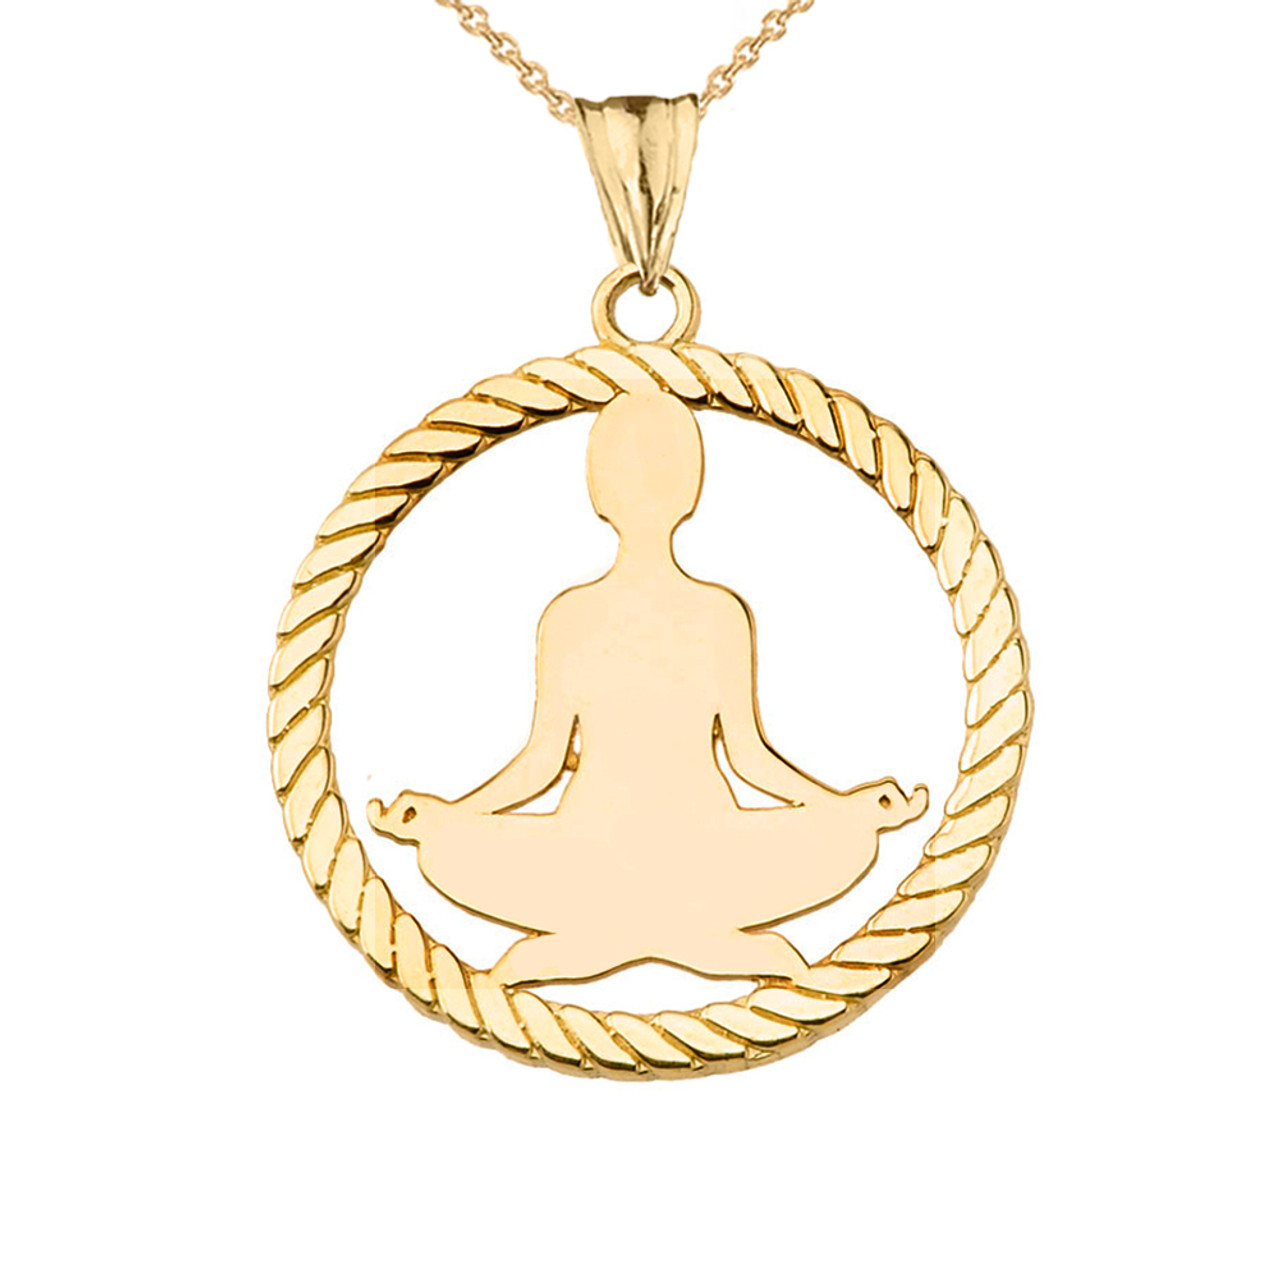 Meditating Silhouette Yogi in Rope Pendant Necklace in Yellow Gold